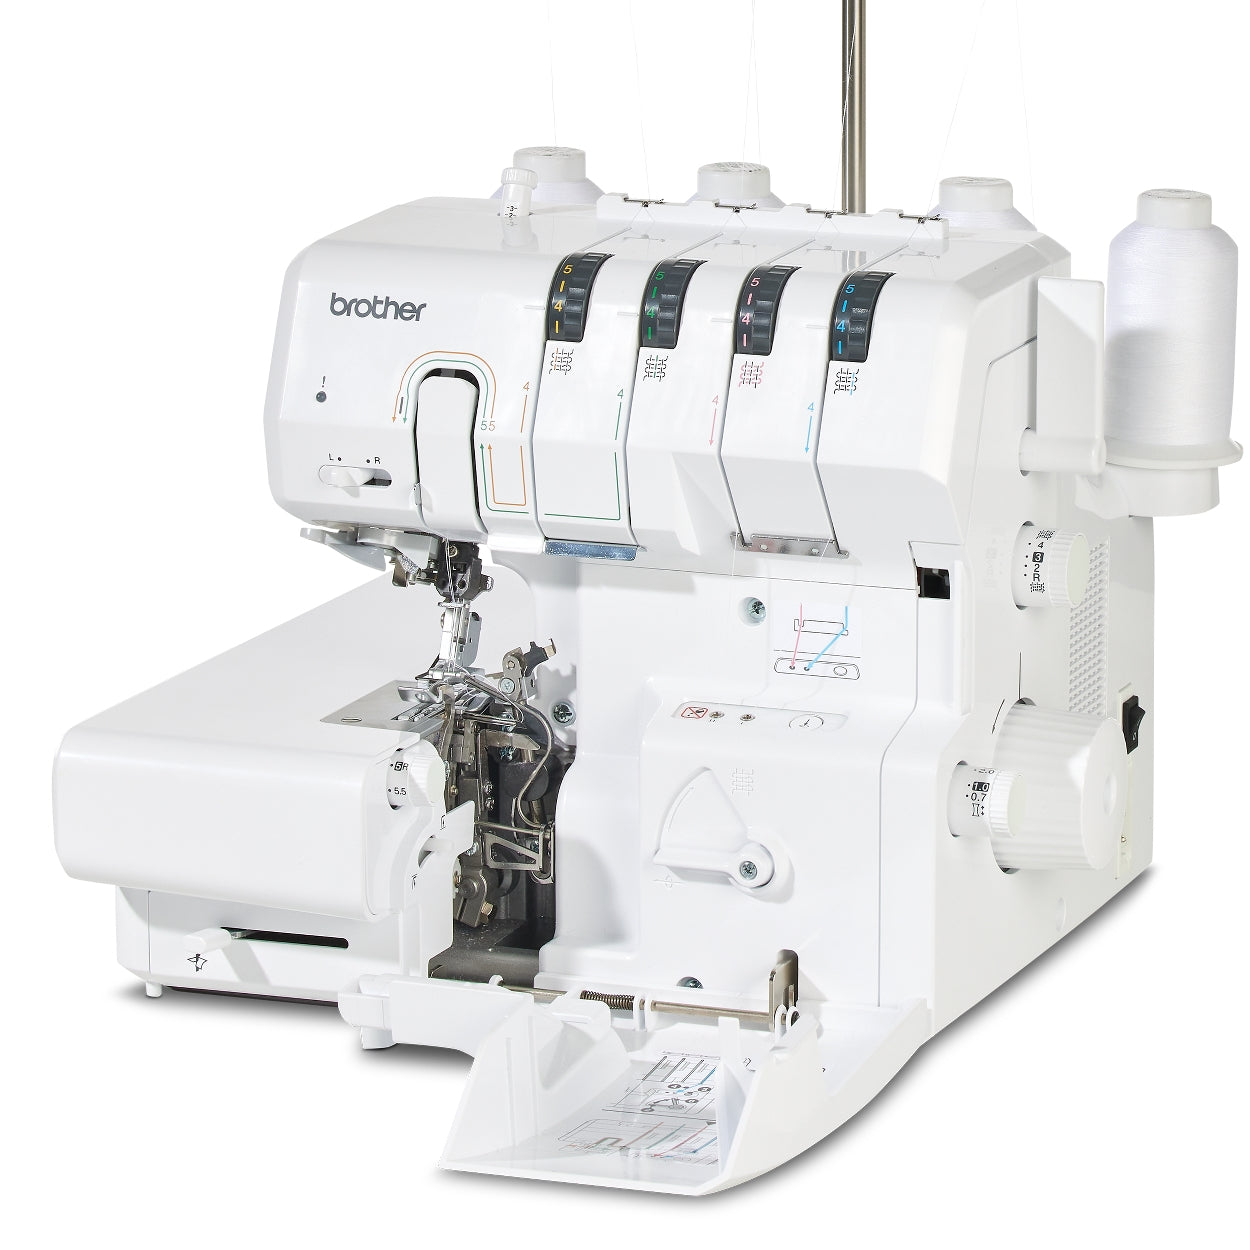 Brother Airflow 3000 Overlocker from Jaycotts Sewing Supplies